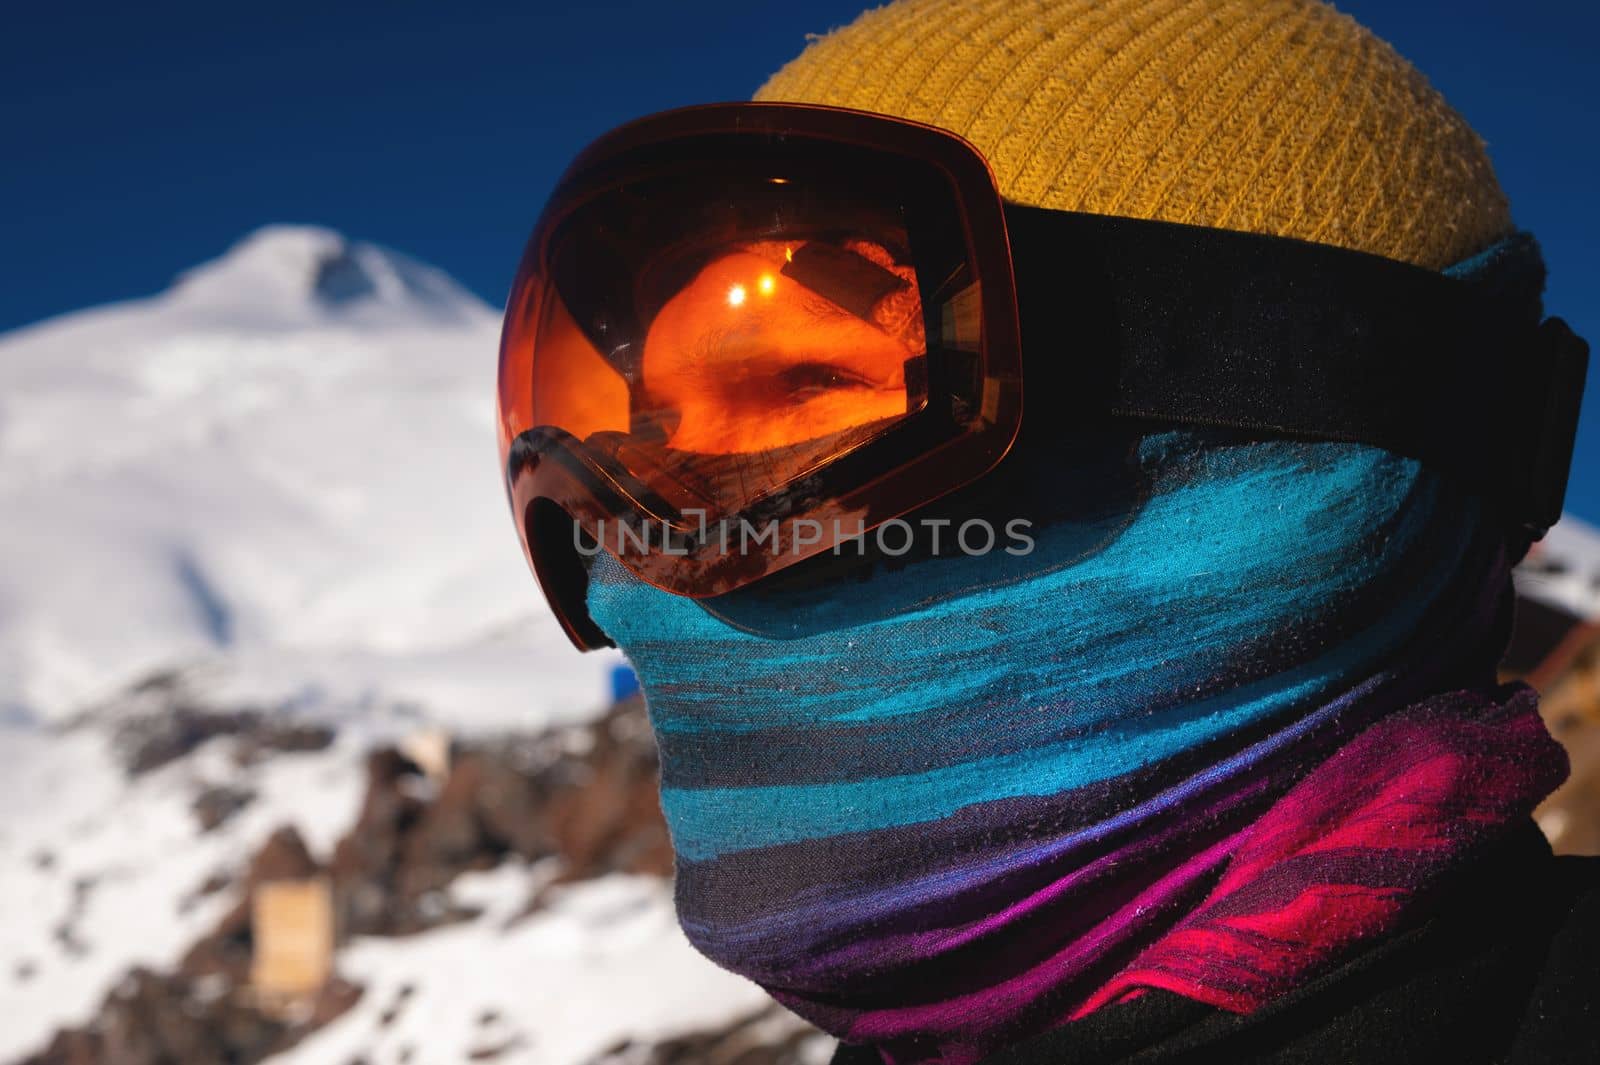 Portrait of a skier at a ski resort against the backdrop of mountains and blue sky. Winter sports.